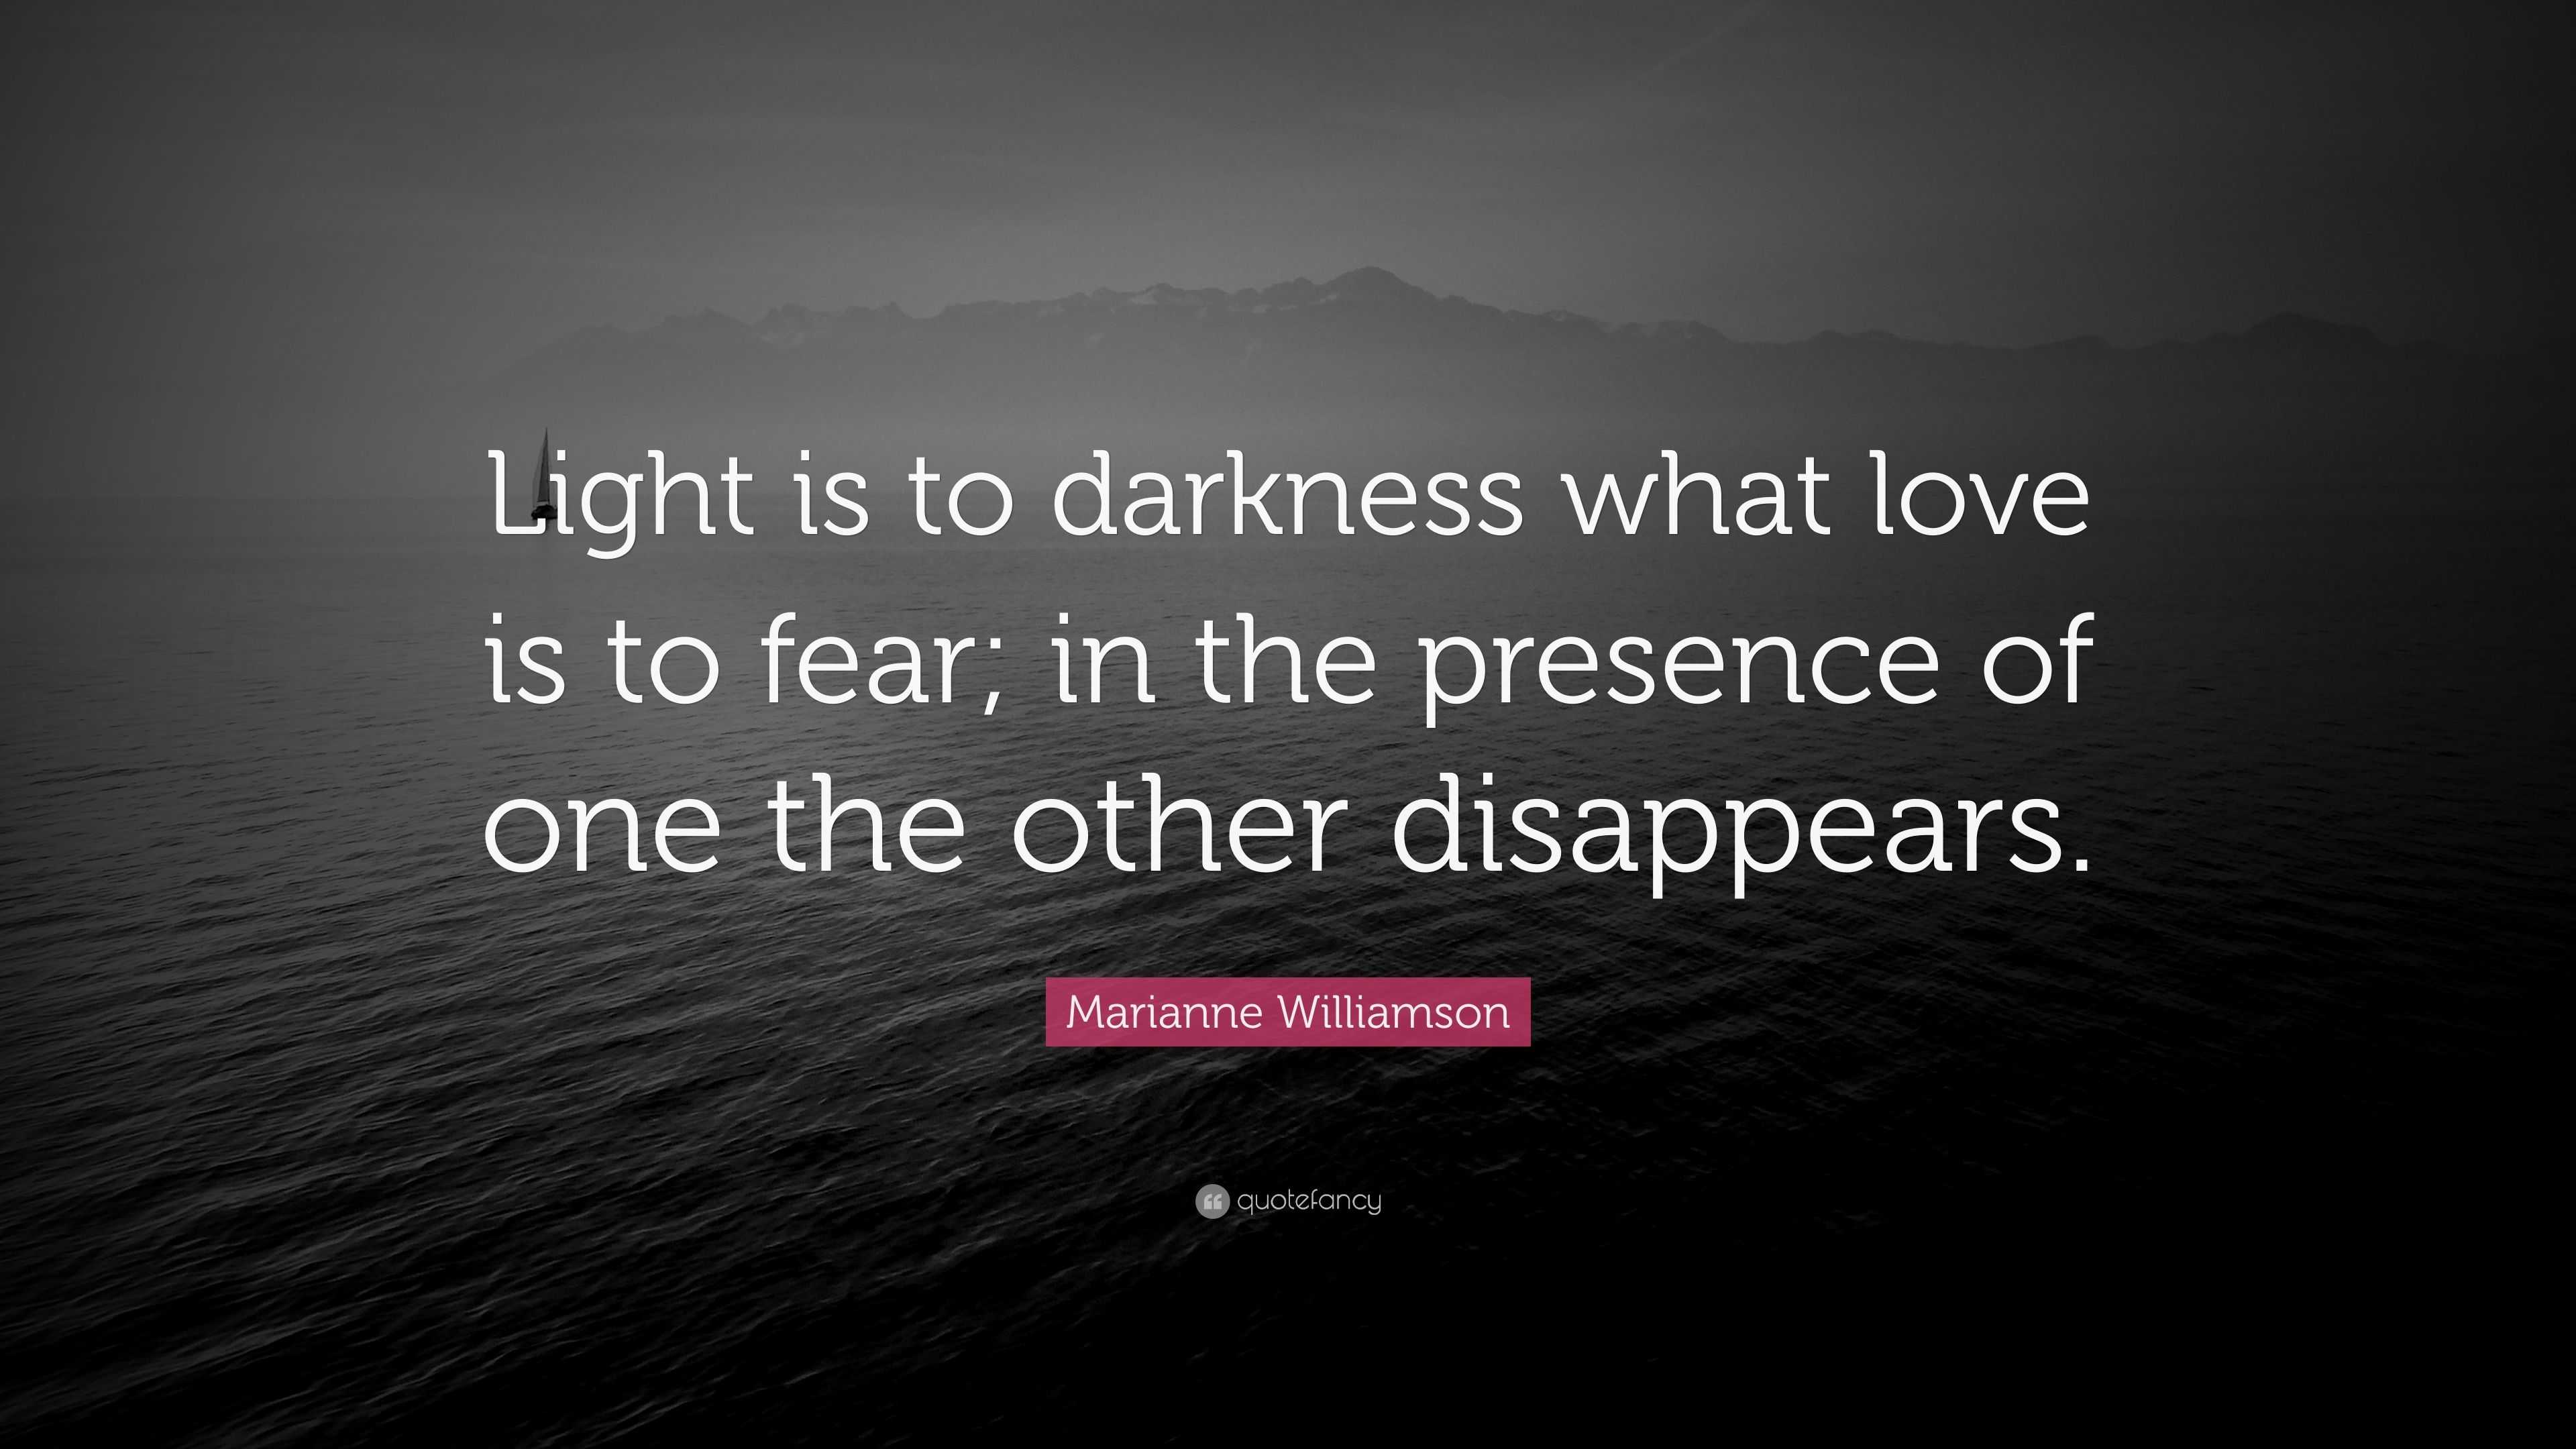 Marianne Williamson Quote Light Is To Darkness What Love Is To Fear In The Presence Of One The Other Disappears 12 Wallpapers Quotefancy